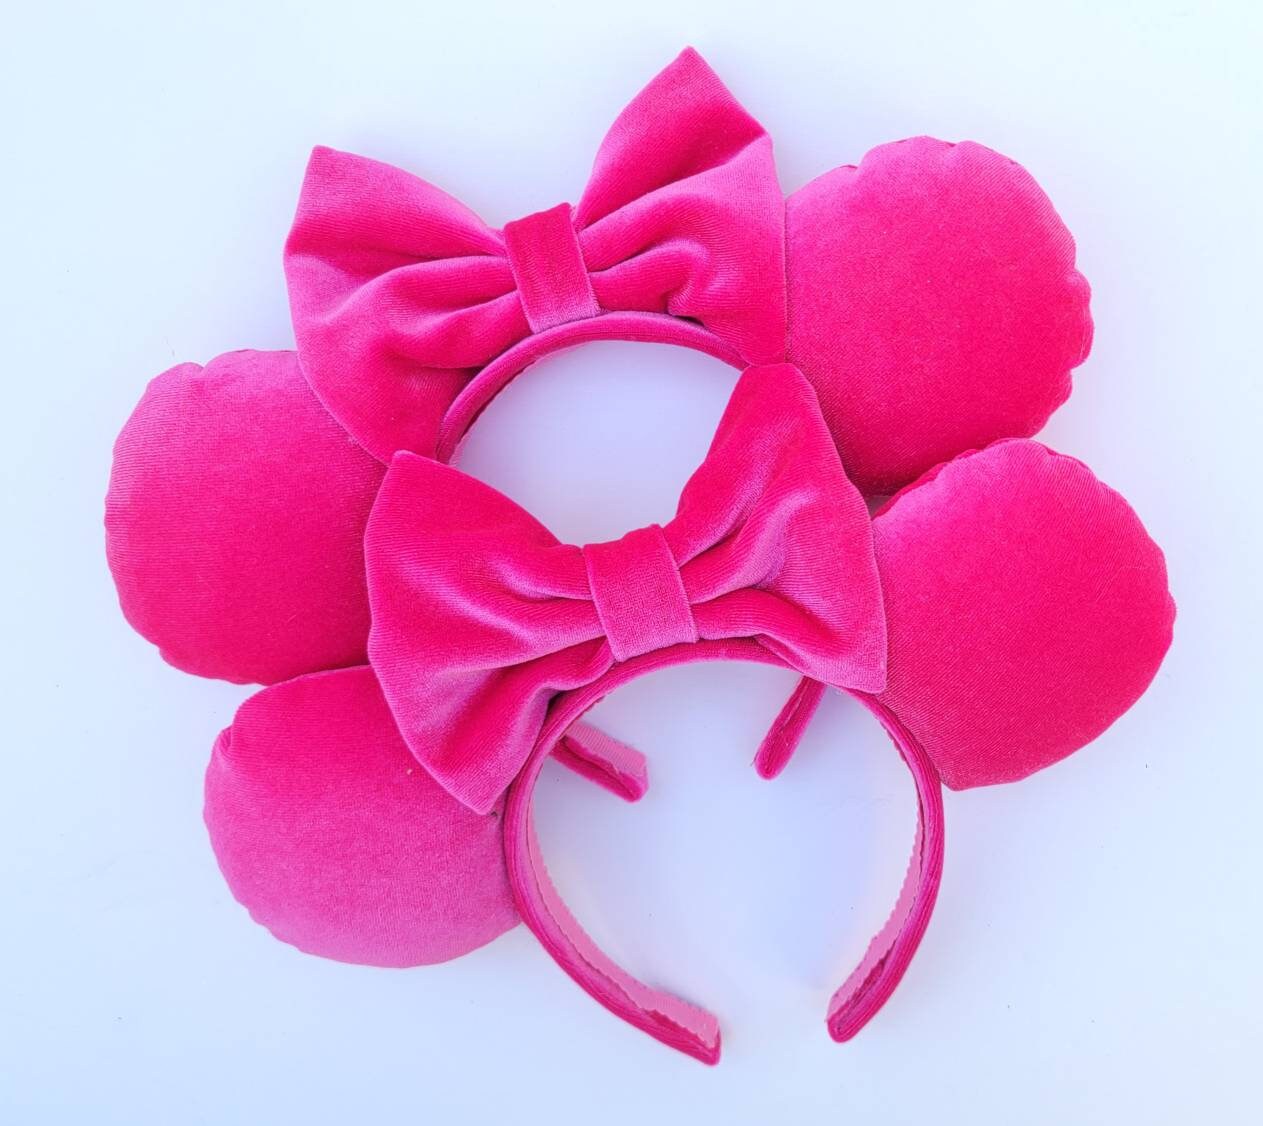 Disneyparks Disney Parks Exclusive - Minnie Mickey Ears Headband Bejeweled Cranberry Red Velvet